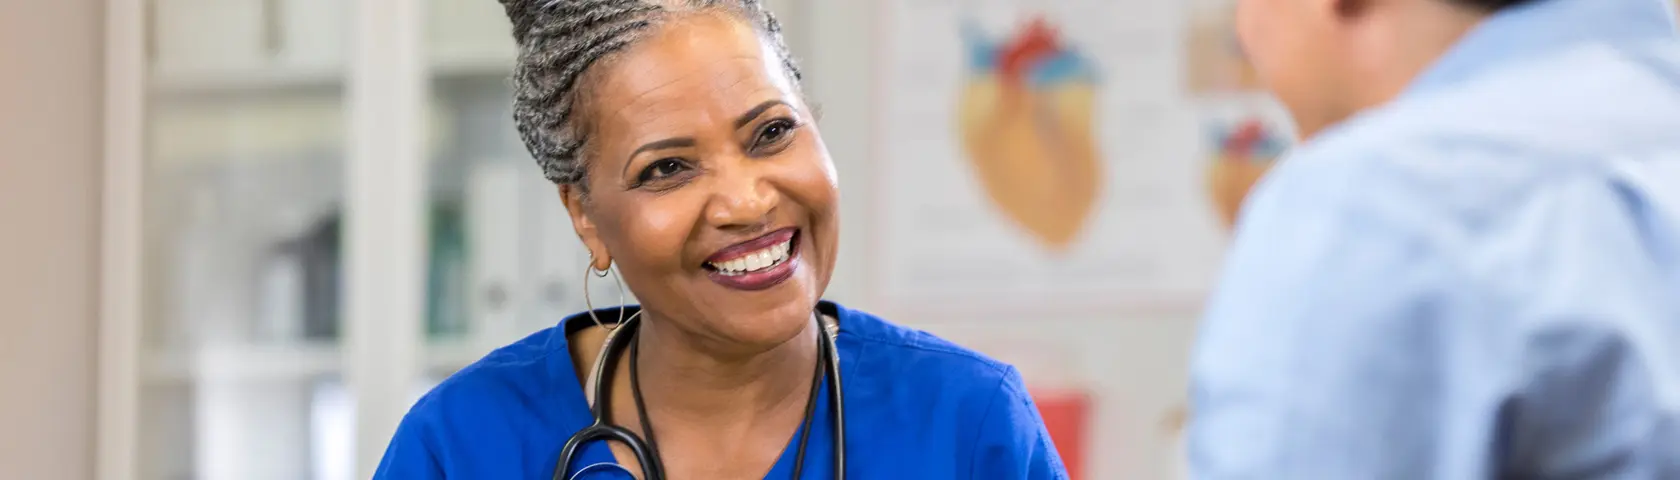 Female black doctor in royal blue scrubs and a stethoscope draped around her neck smiling at a patient in the foreground. Anatomical charts can be seen in the background.